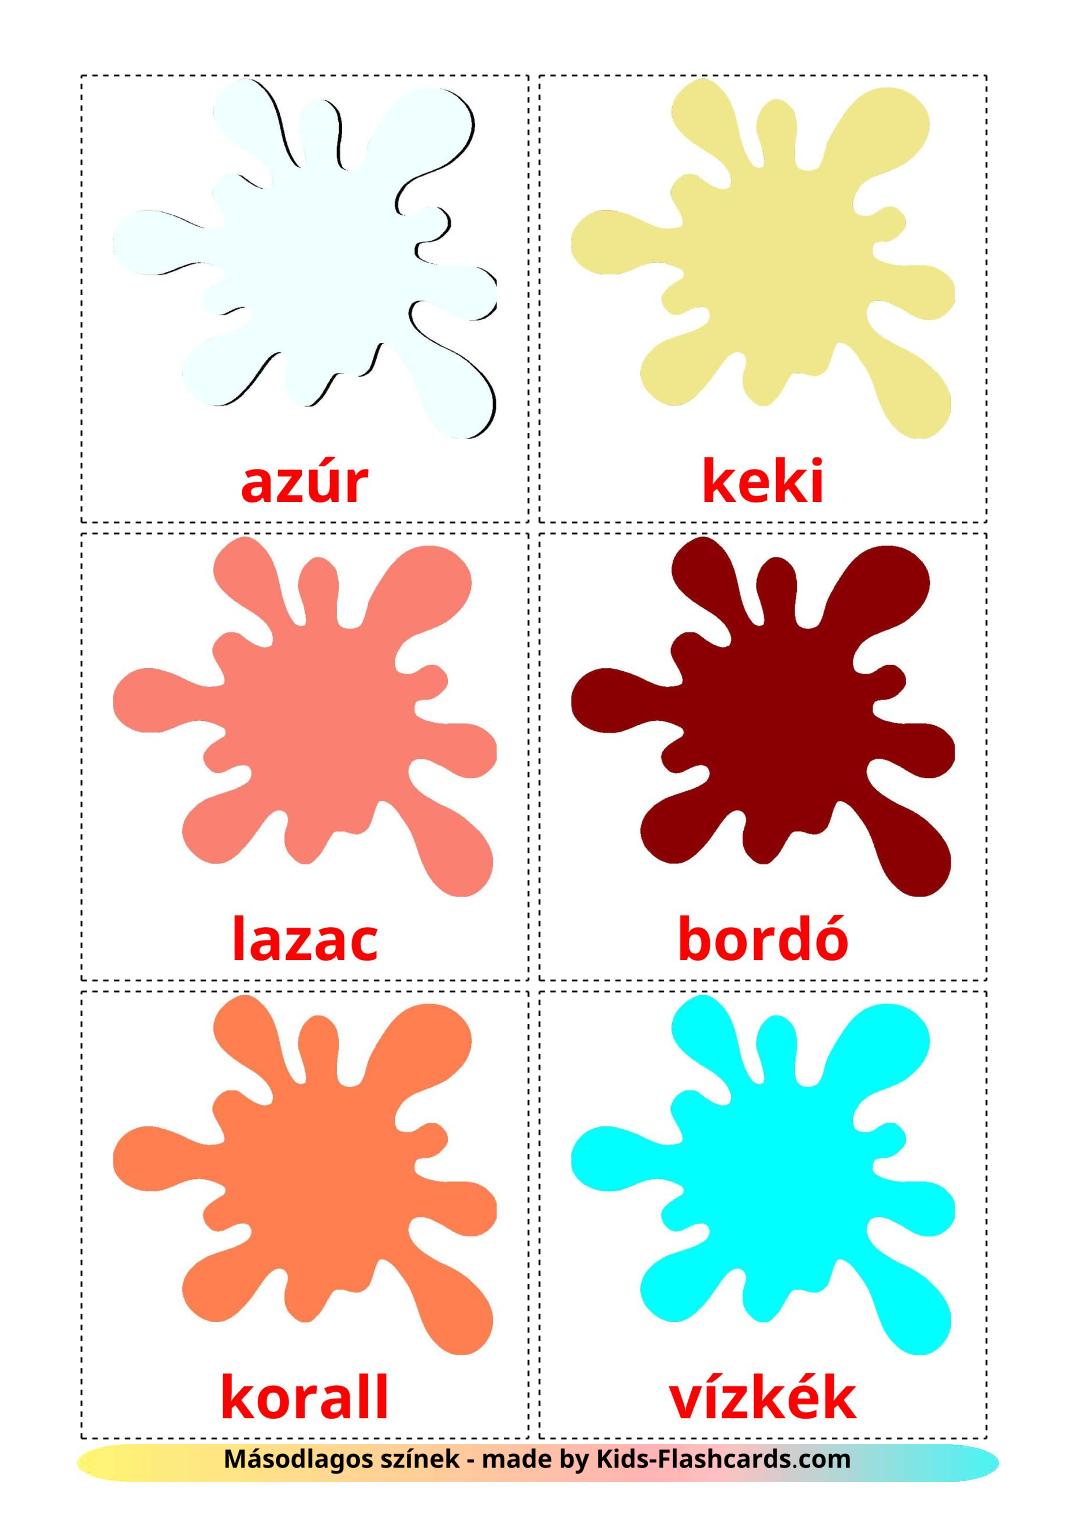 Secondary colors - 20 Free Printable hungarian Flashcards 